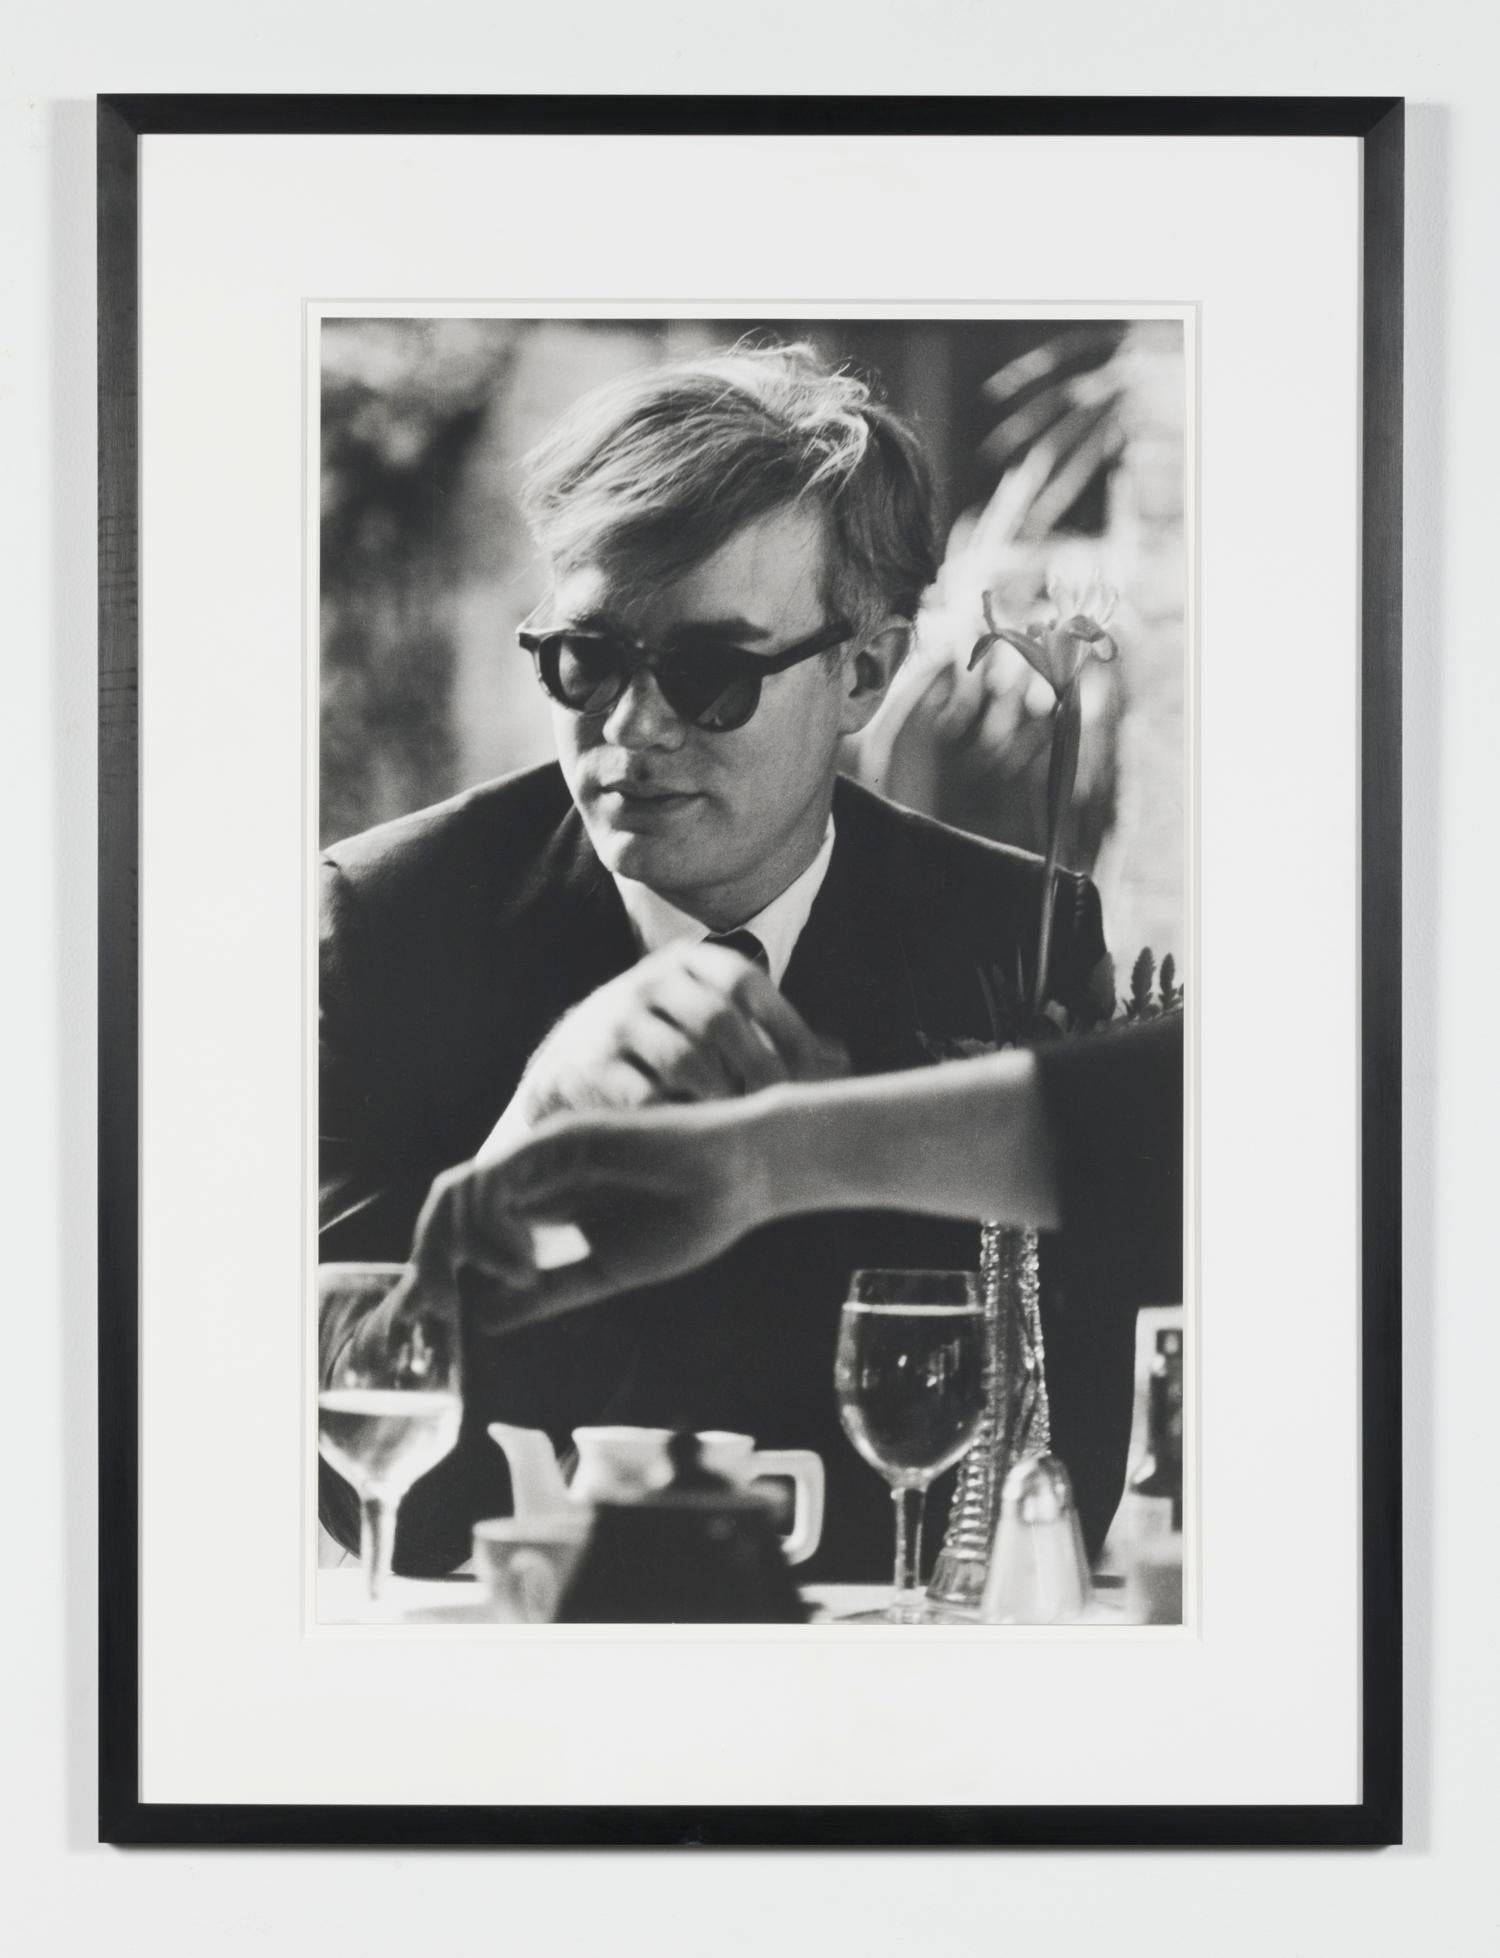 Andy Warhol (at table) - Photograph by Dennis Hopper